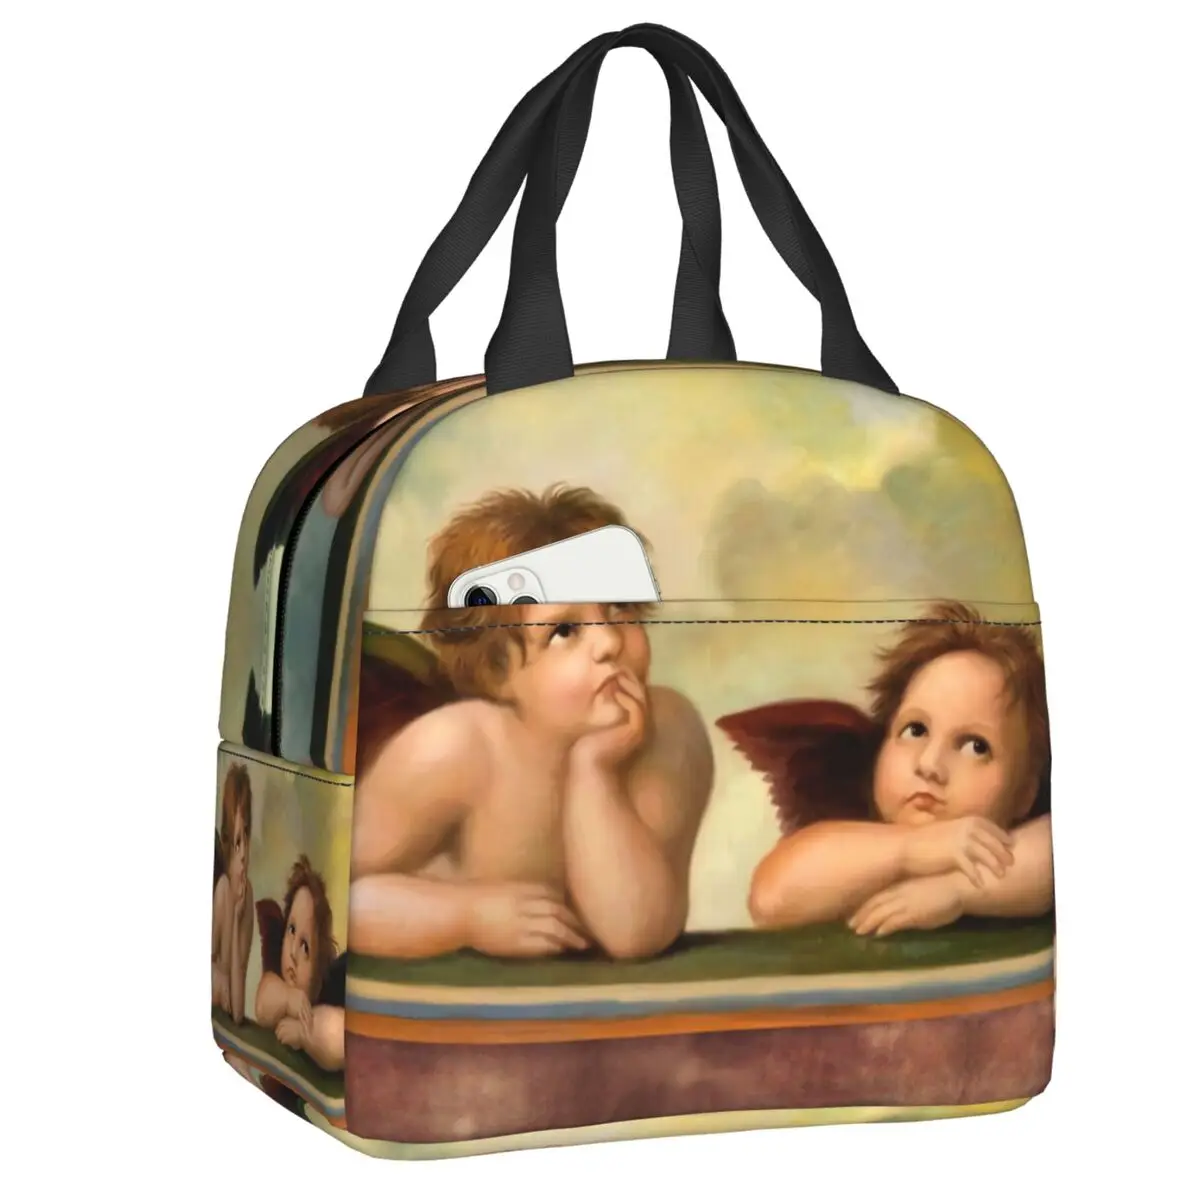 

Renaissance Angels Winged Cherubs Insulated Lunch Tote Bag Portable Warm Cooler Thermal Lunch Bag Food Picnic Container Tote